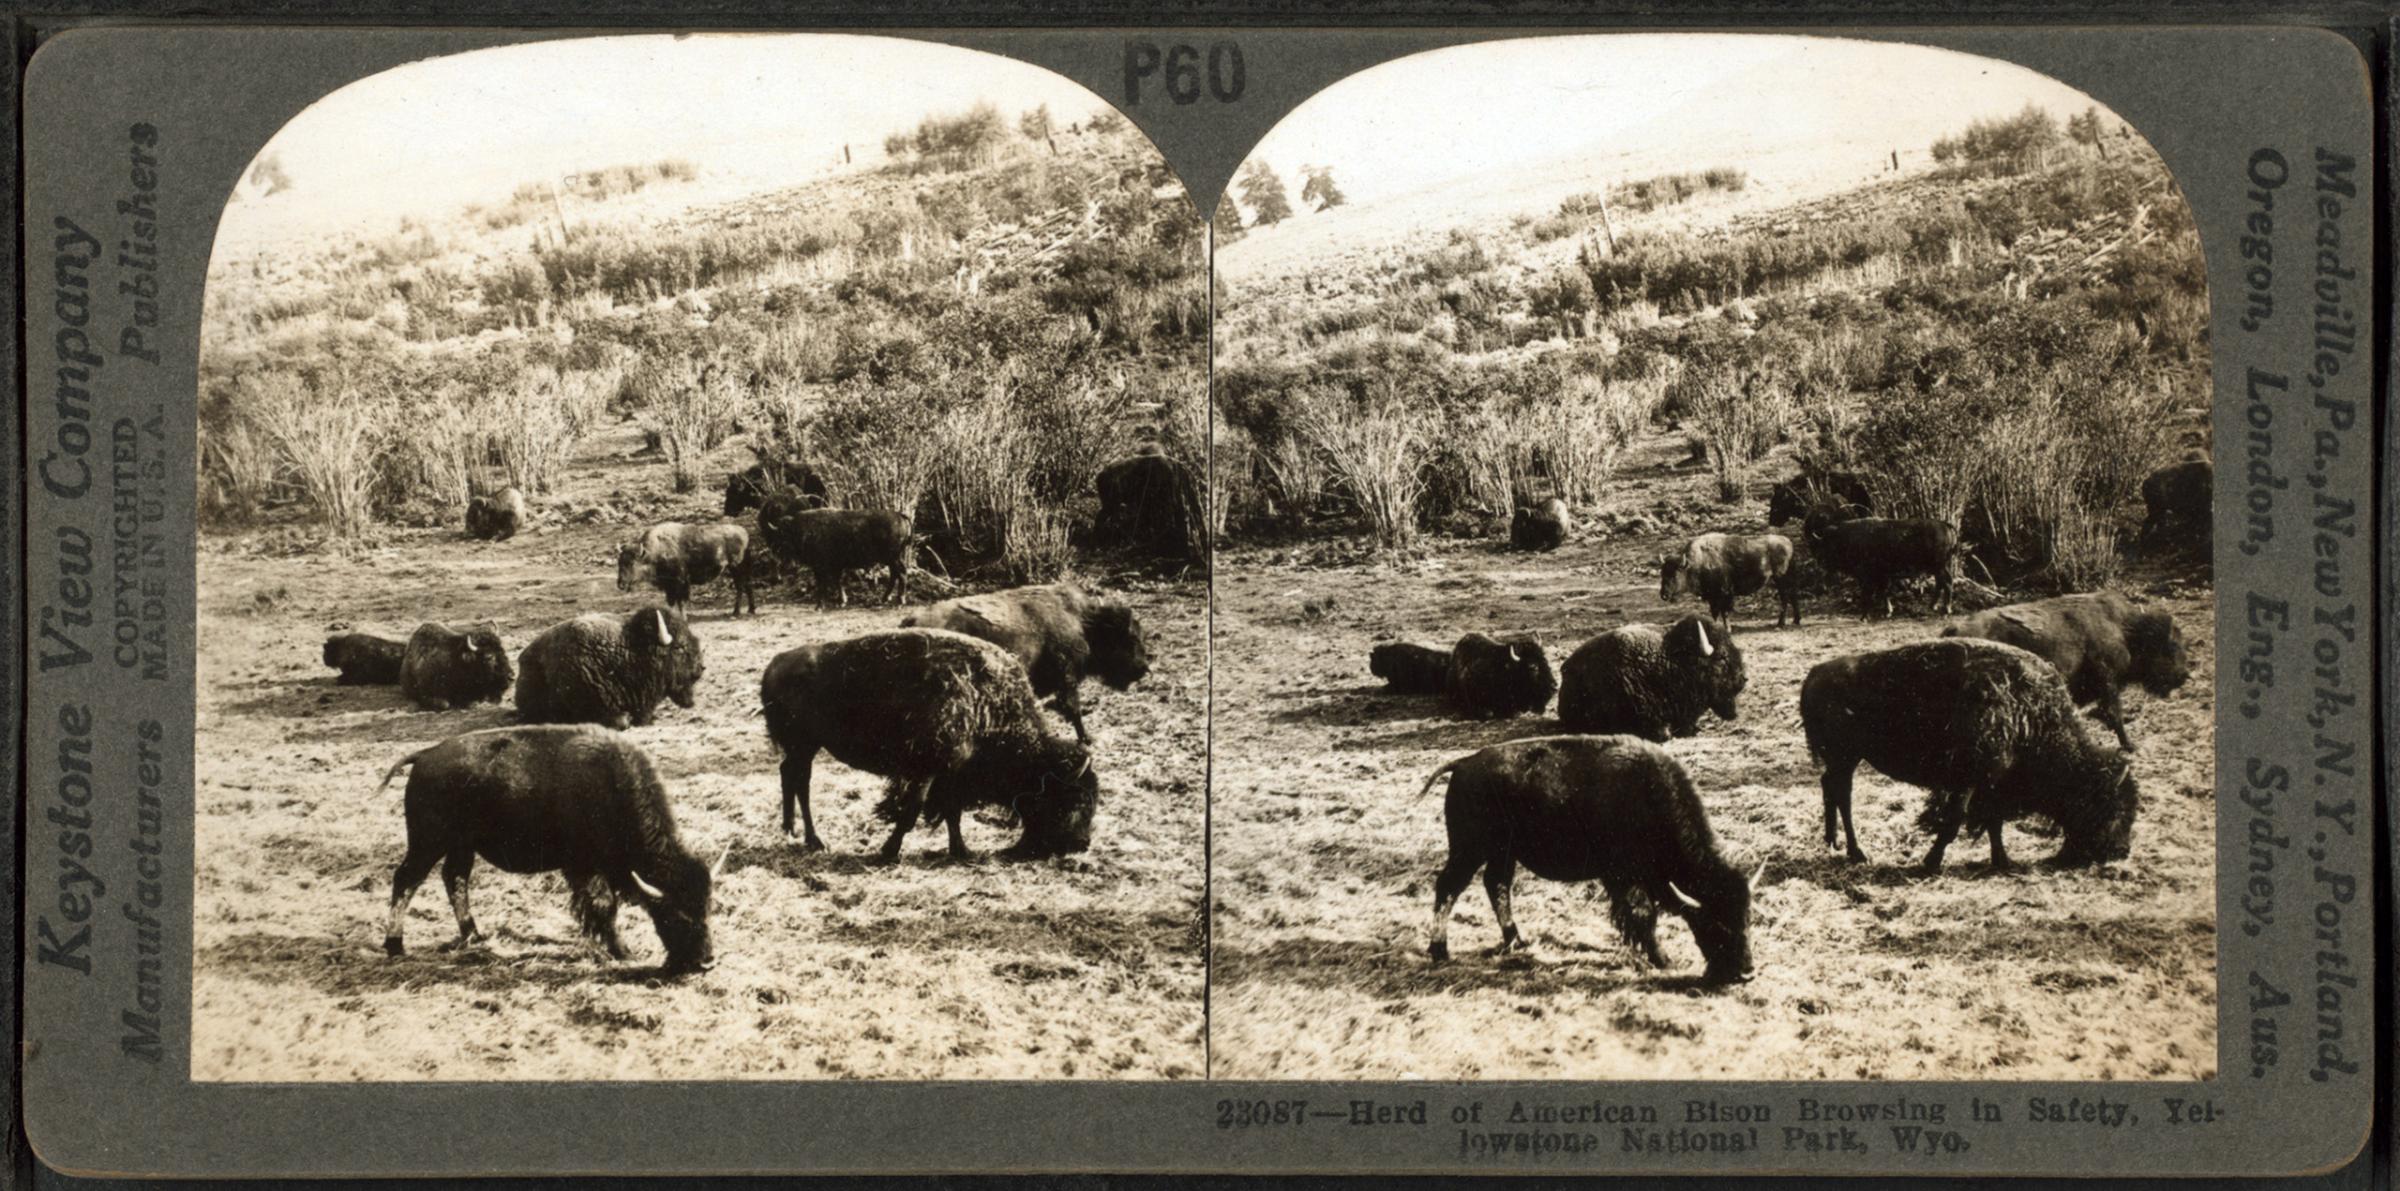 Herd of American Bison, browsing in safety, Yellowstone National Park, Wyoming. Circa 1895-1920.